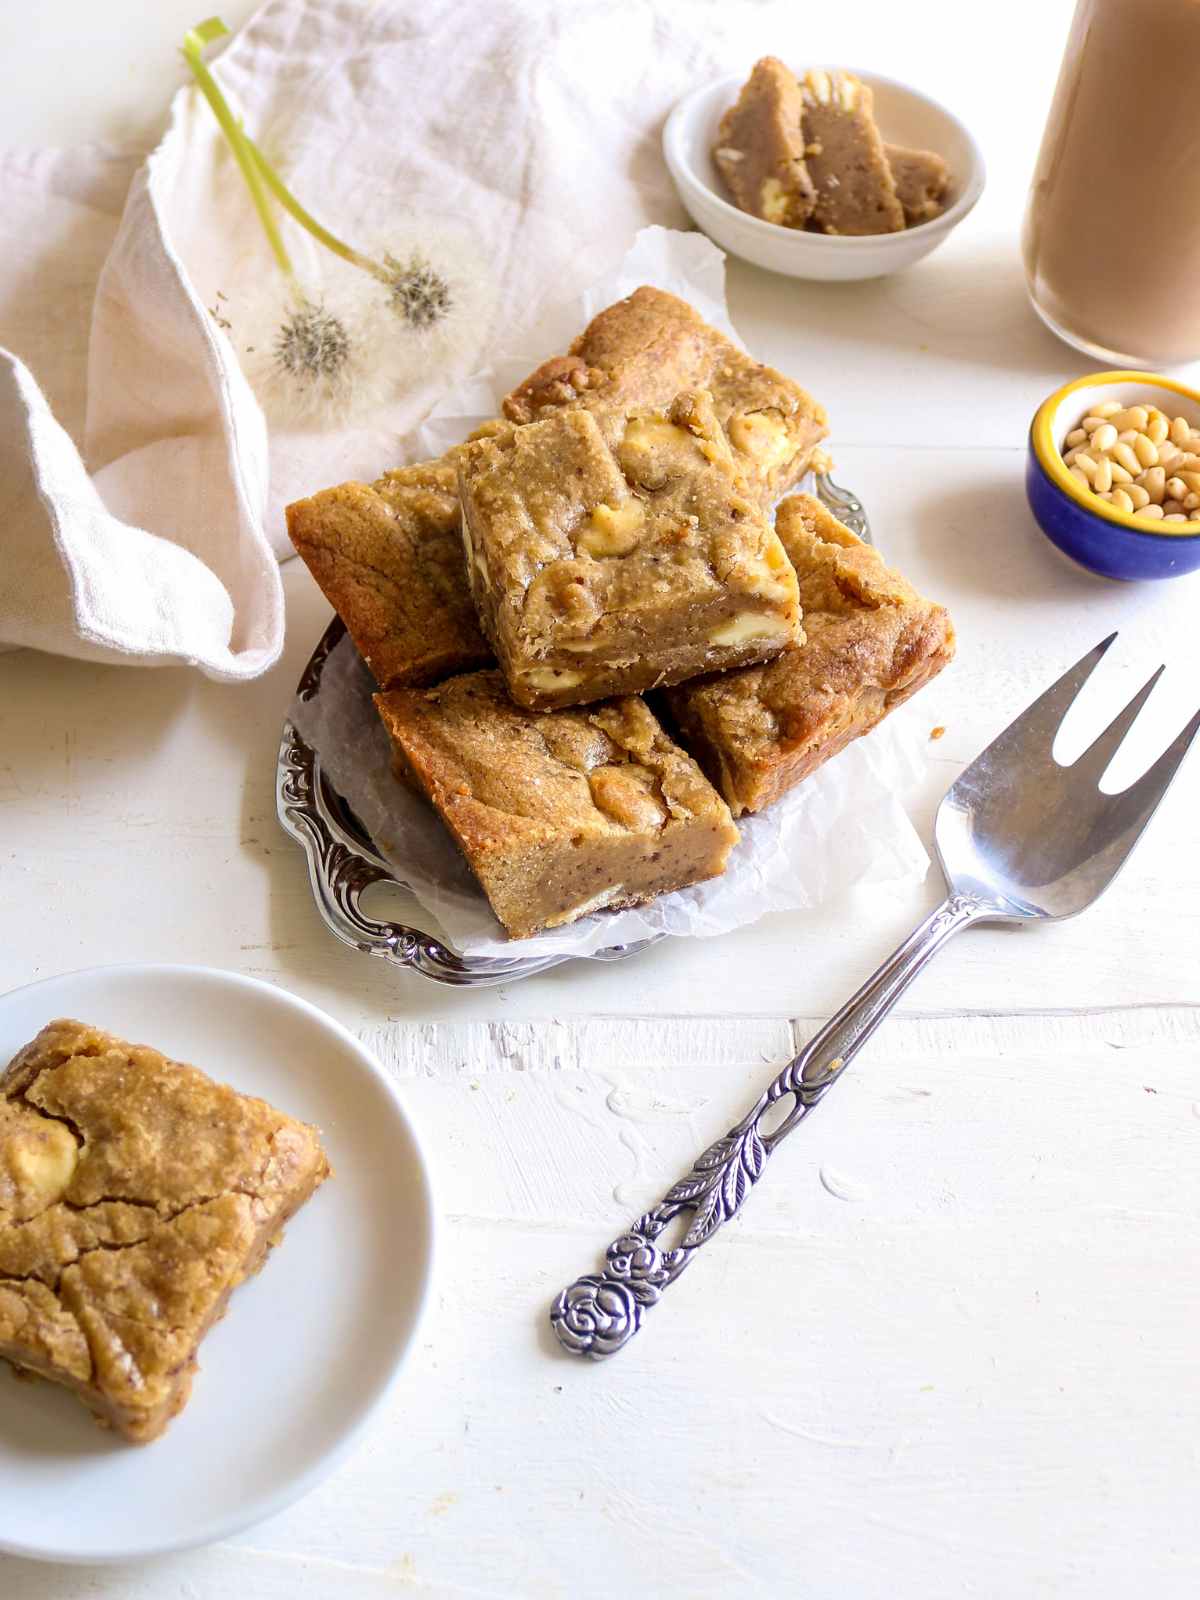 Blondies served with cold coffee.